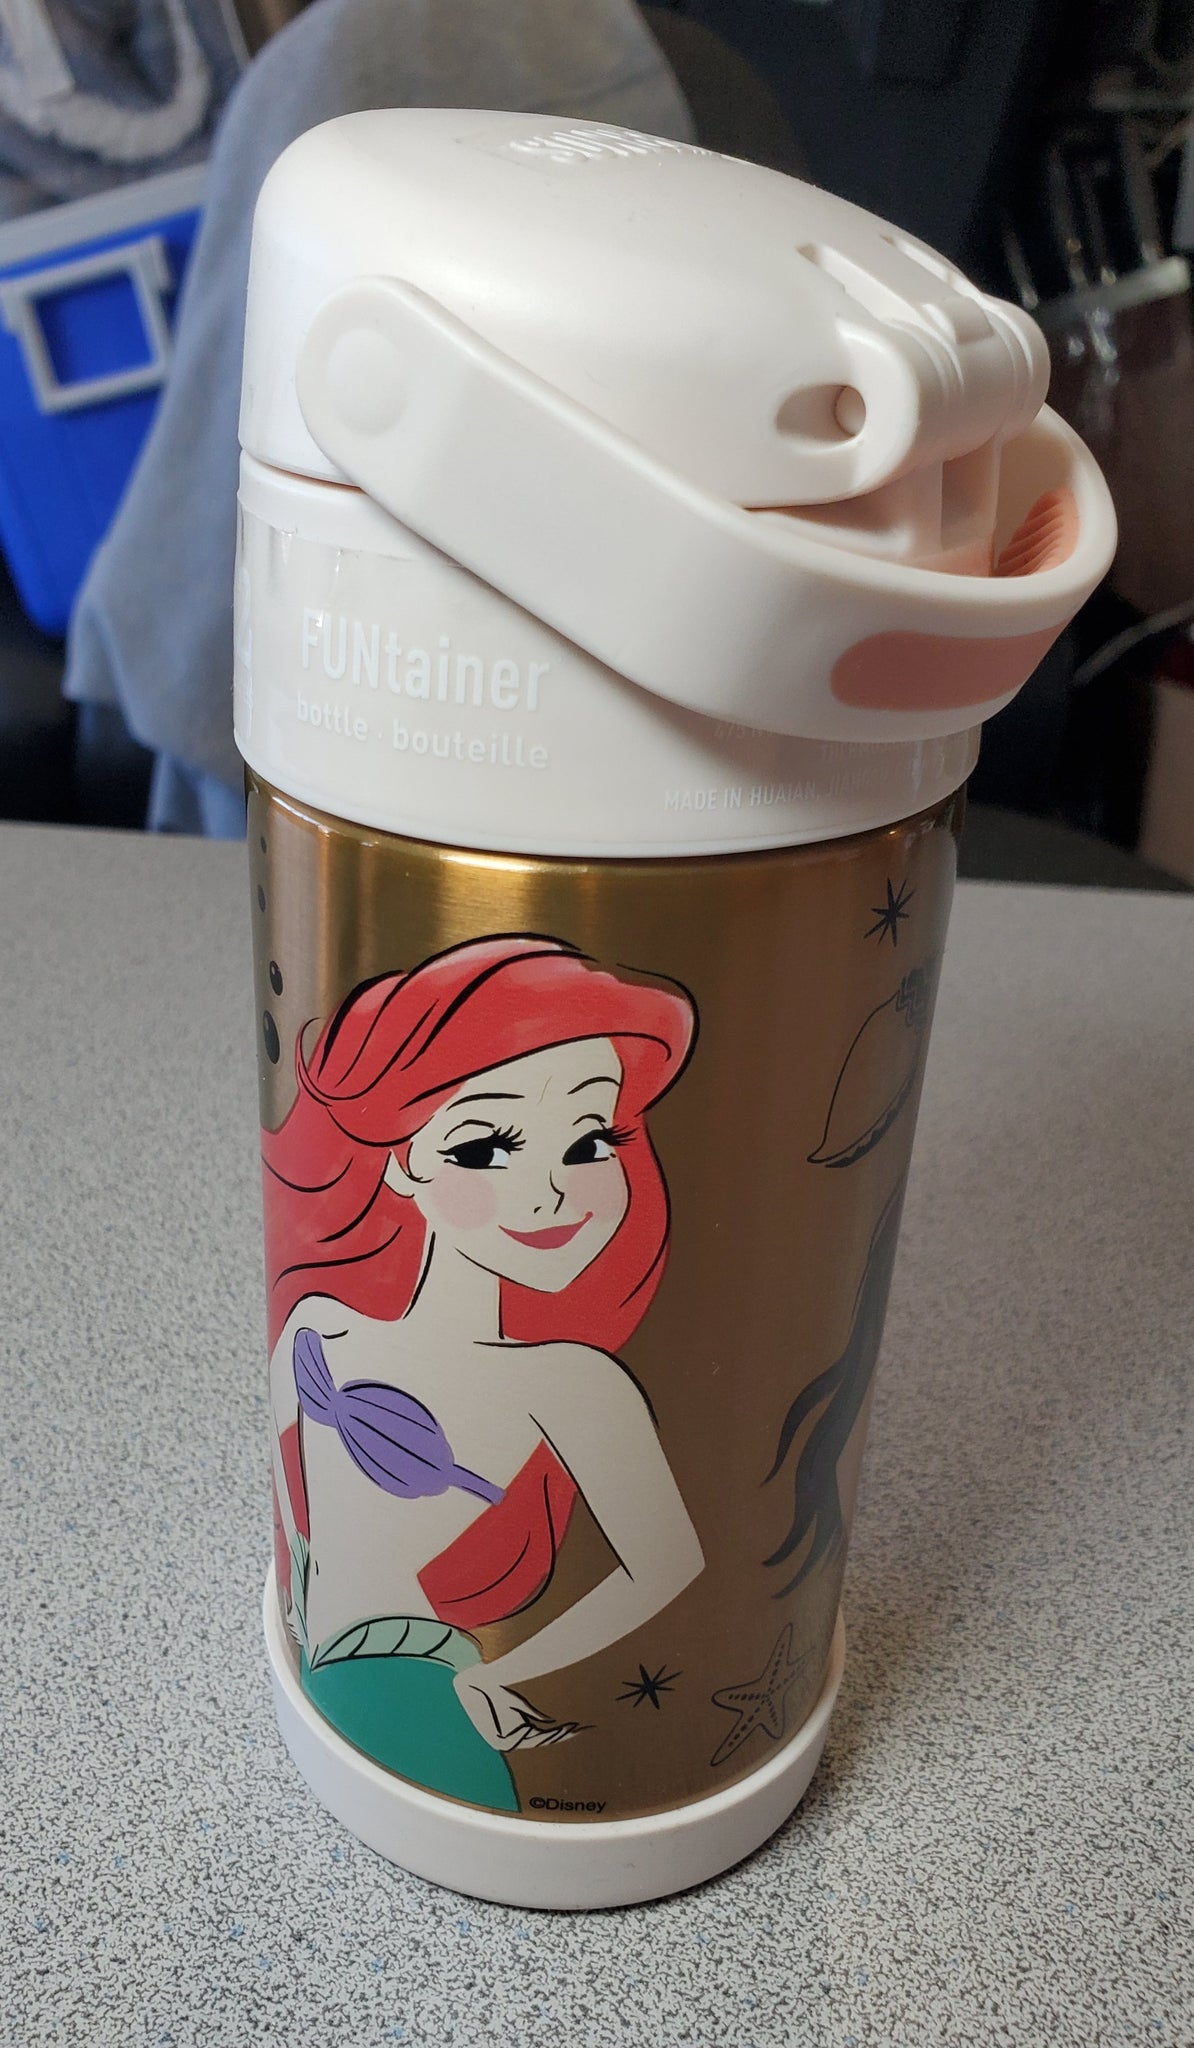 Thermos Funtainers 12 Ounce Disney Princess Bottle 